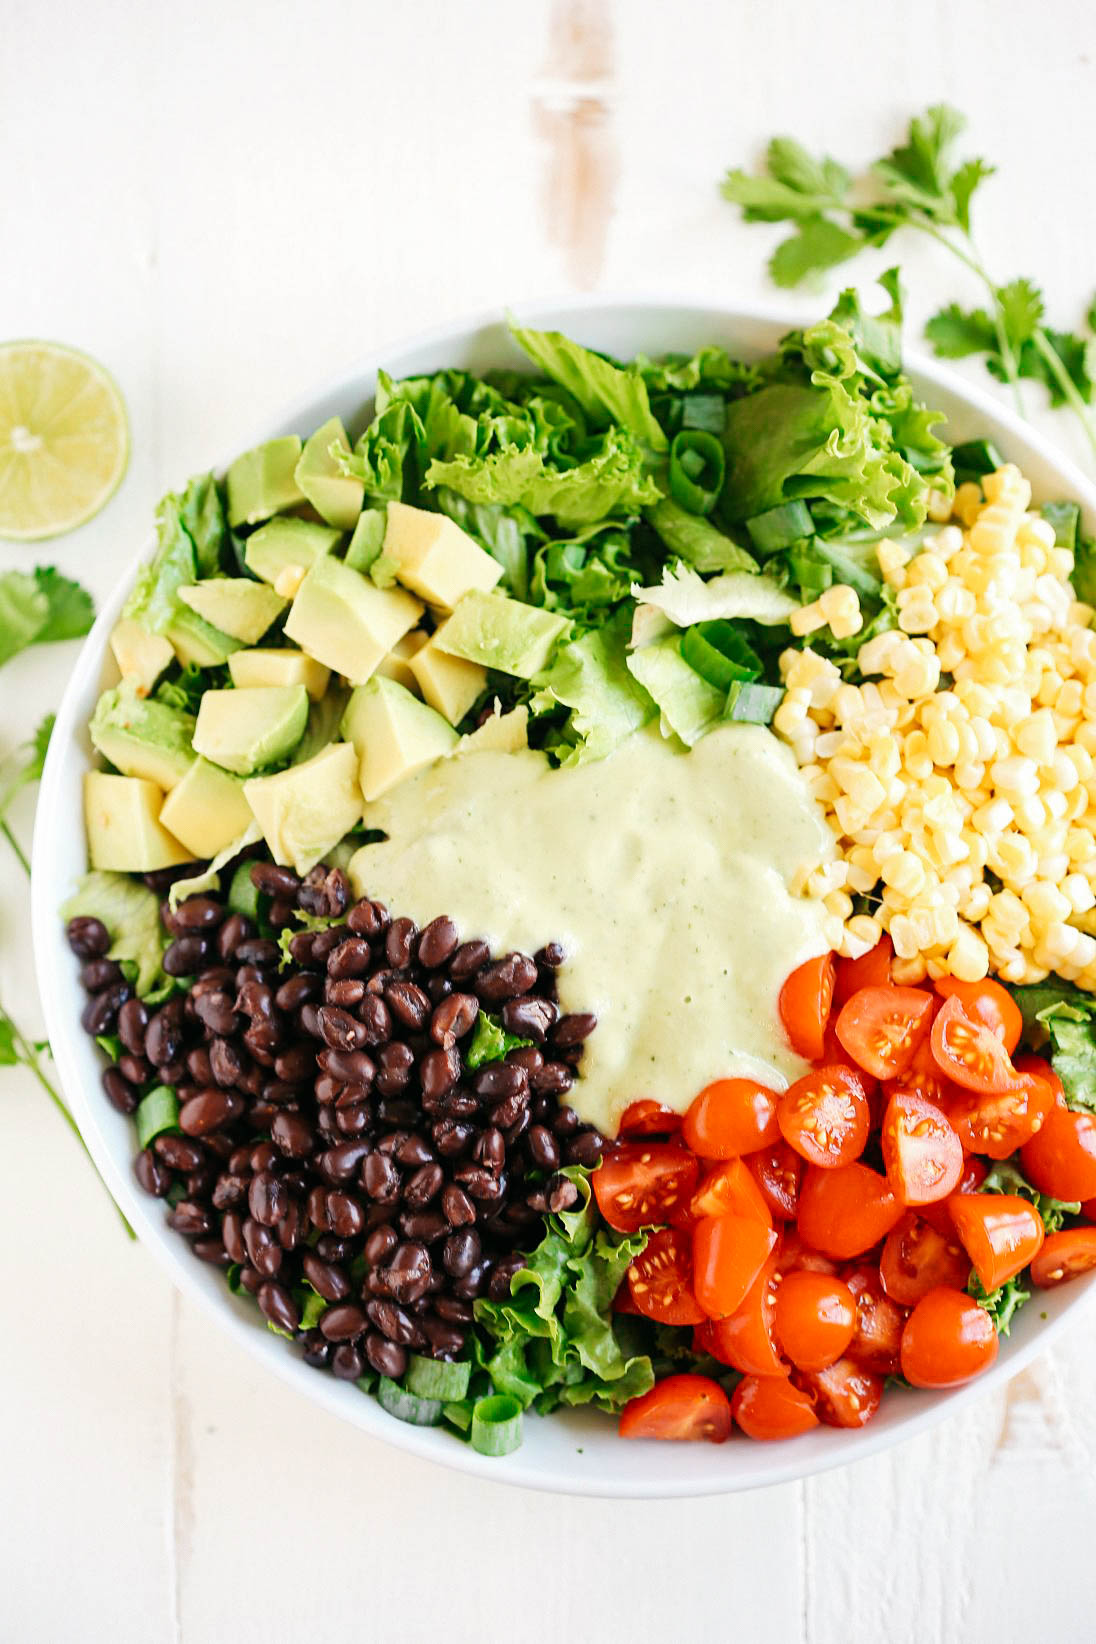 These are 6 of my favorite go-to light and healthy salads that are full of fresh veggies, delicious proteins and TONS of flavor!